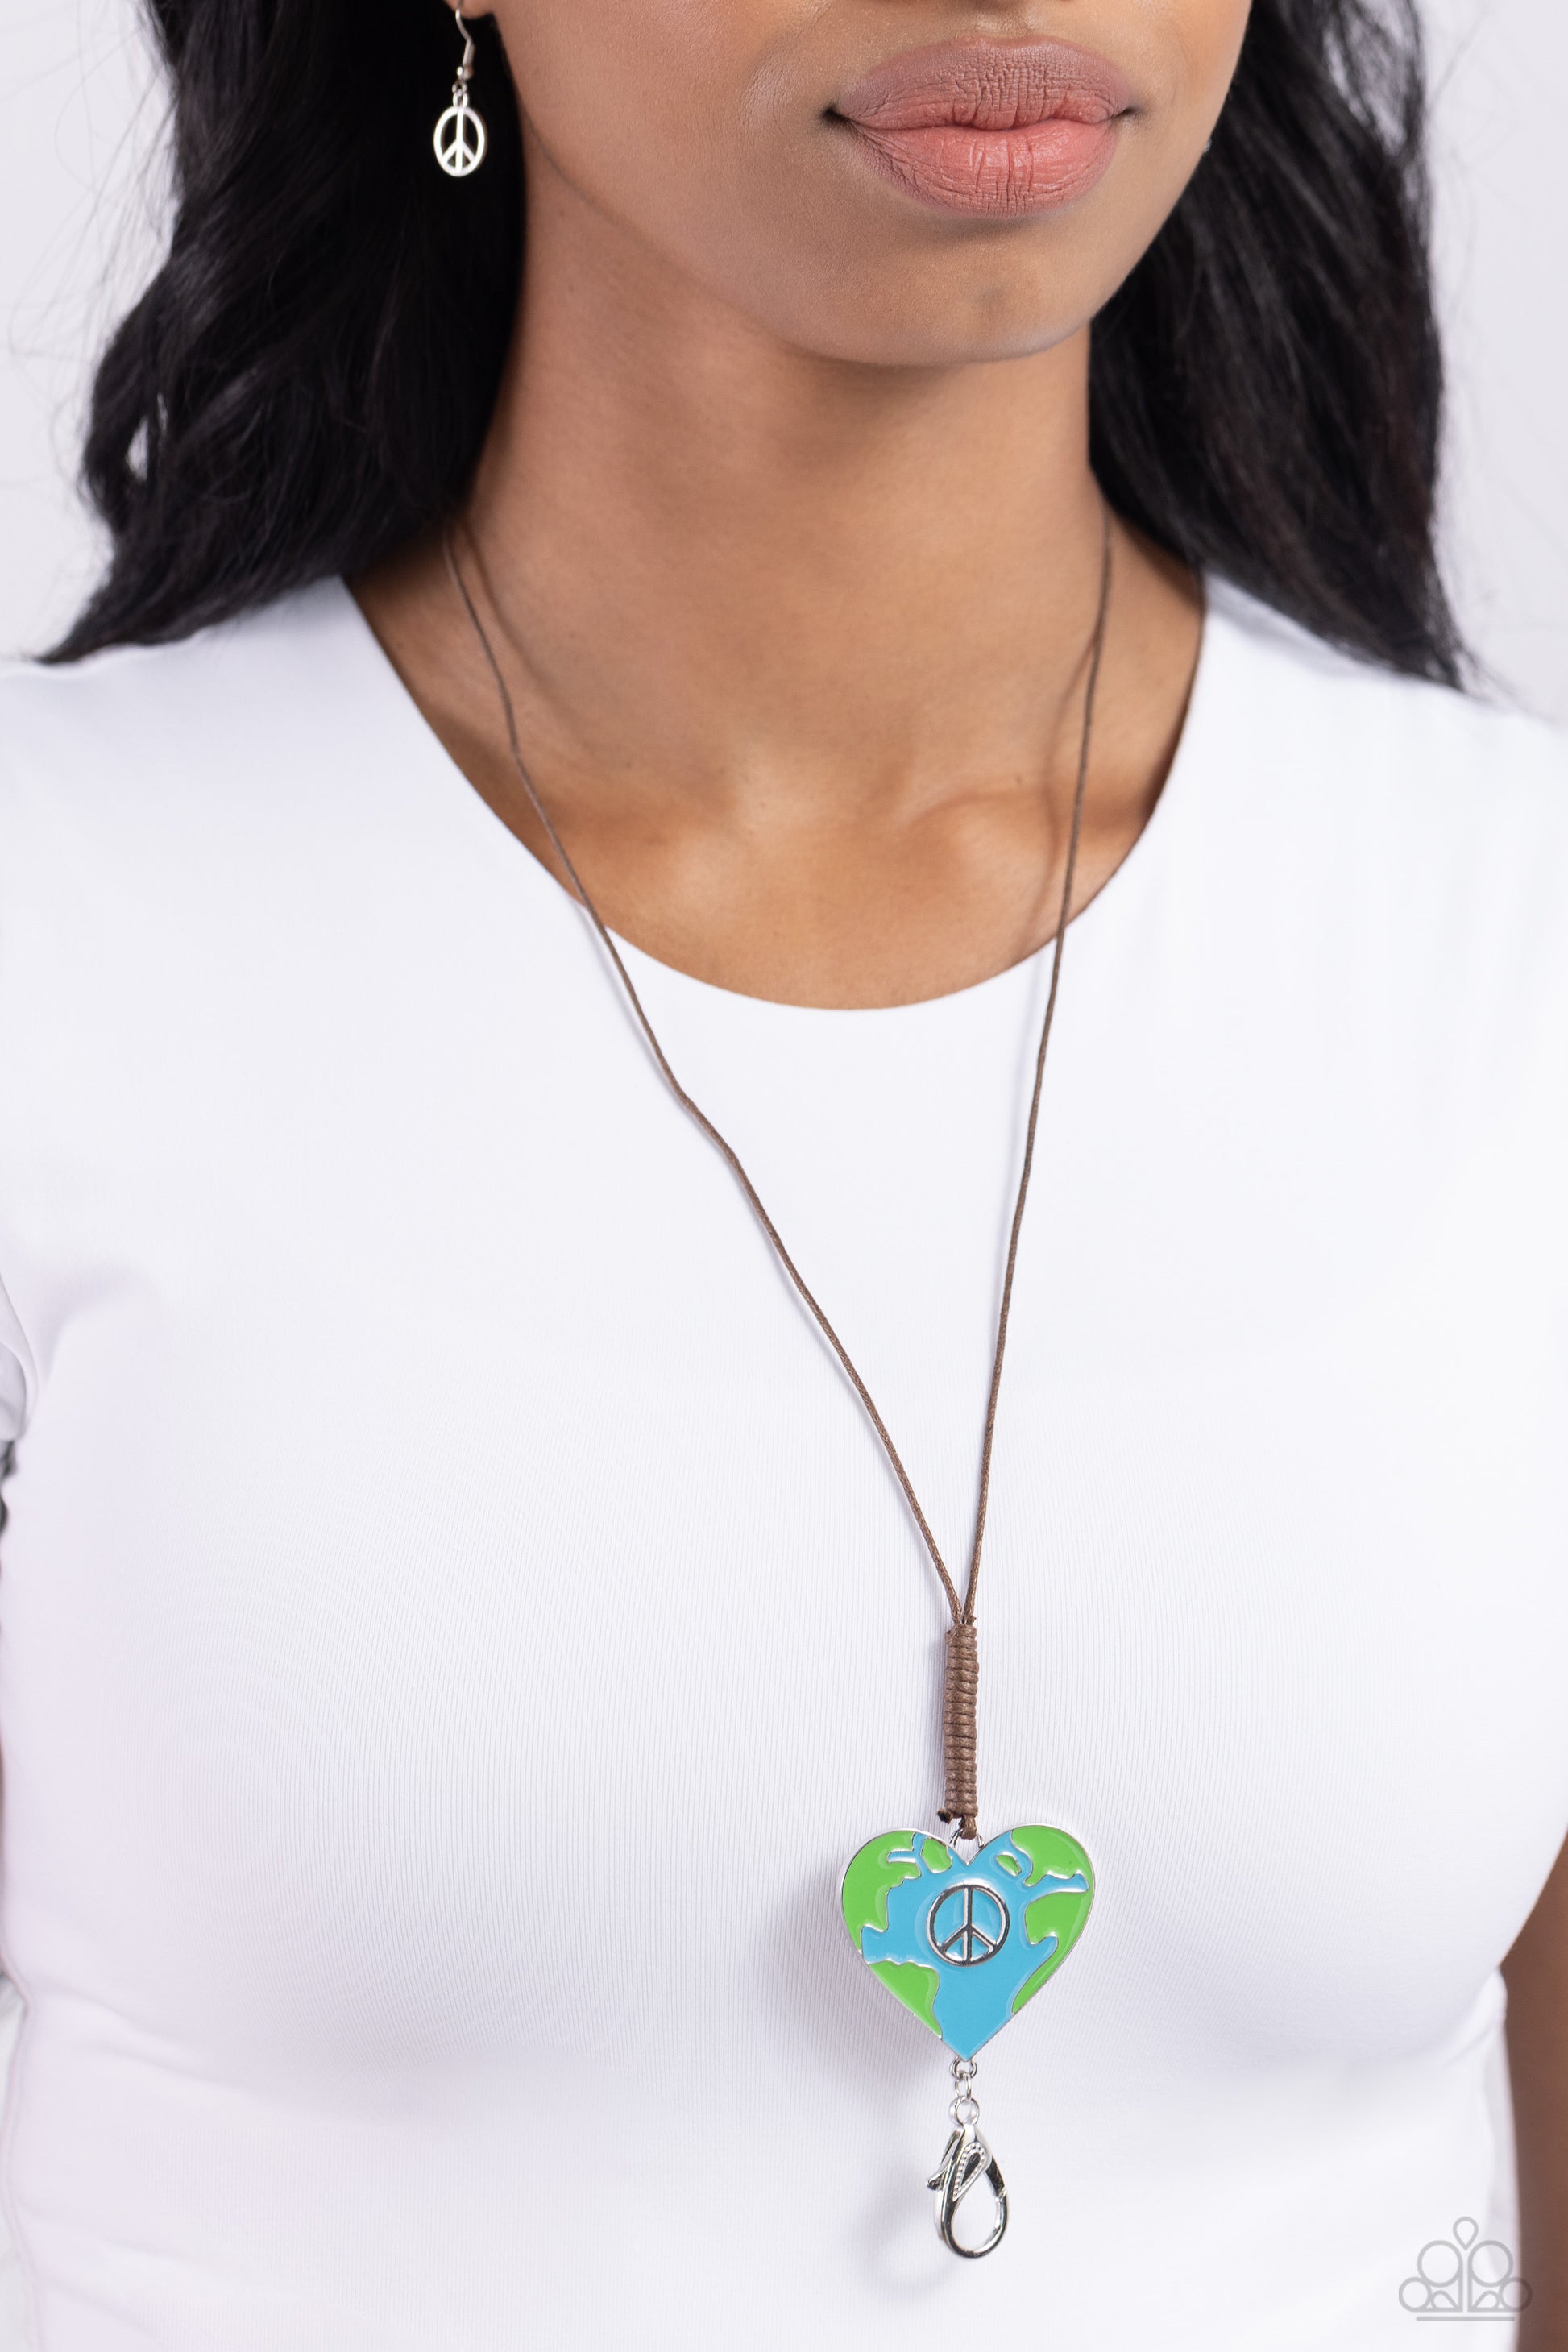 Paparazzi Accessories Earthy Evolution - Blue Featuring a silver peace sign center, a heart frame painted in an earth motif in Classic Green and blue hues is knotted in place at the bottom of a lengthened brown cord for a seasonal flair. A lobster clasp h